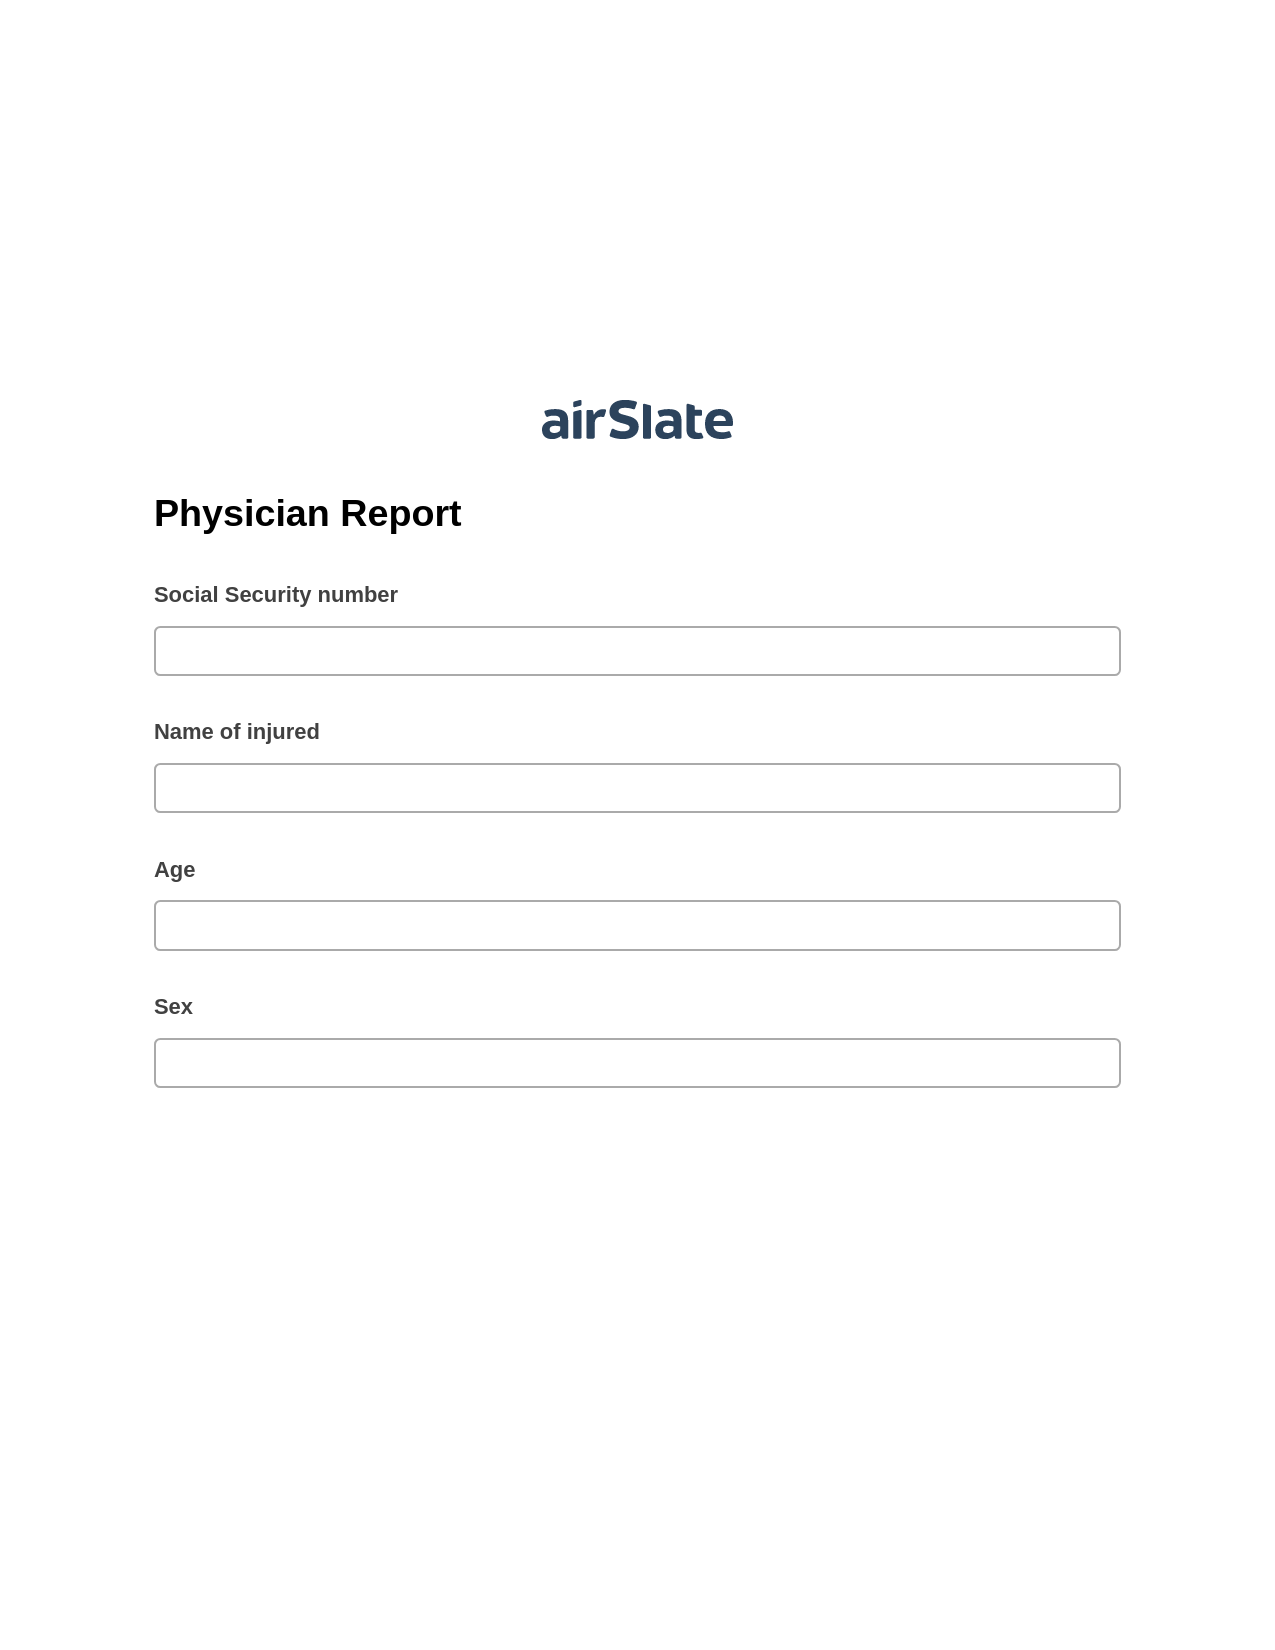 Multirole Physician Report Pre-fill from CSV File Bot, Update NetSuite Record Bot, Export to NetSuite Bot